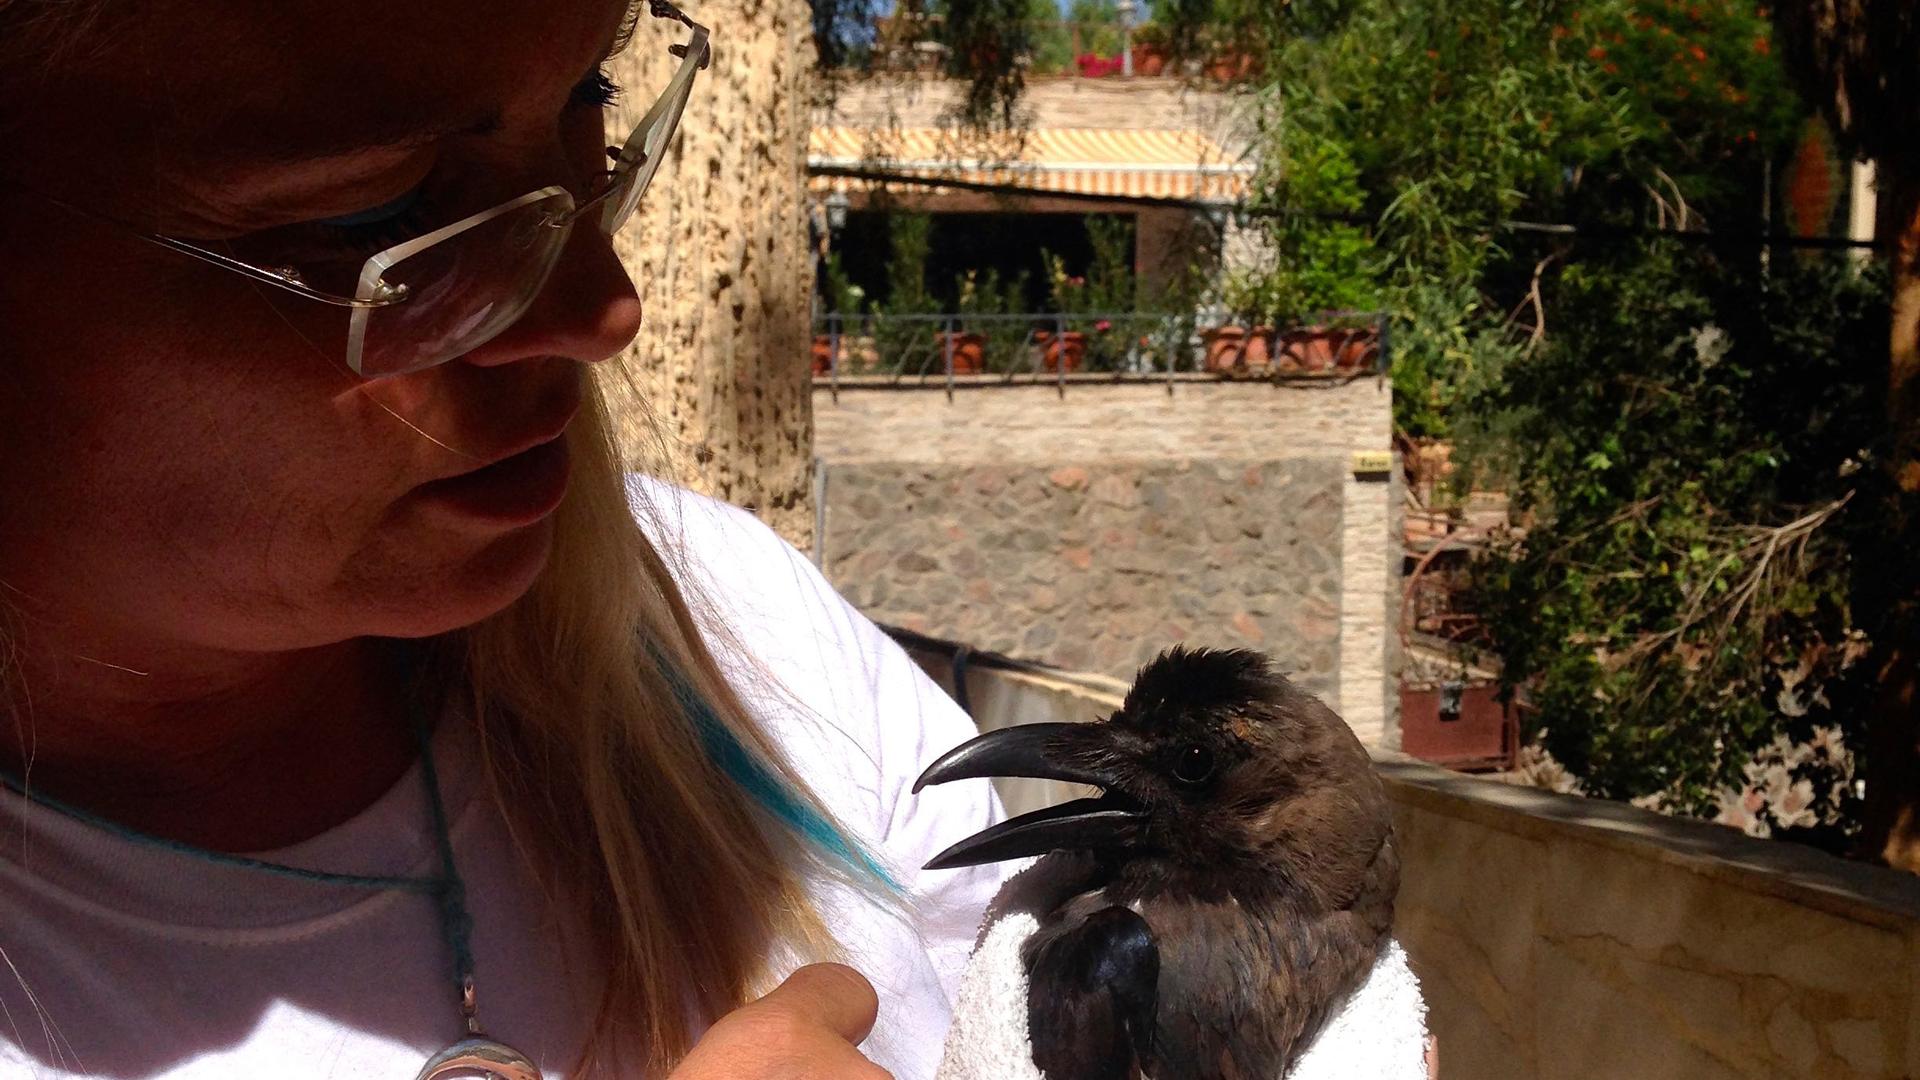 Daniela Schulenburg-Ortner, Eilat animal rights activist, holds Keanu, an injured crow she is rehabilitating in her backyard. She named it after the actor Keanu Reeves.